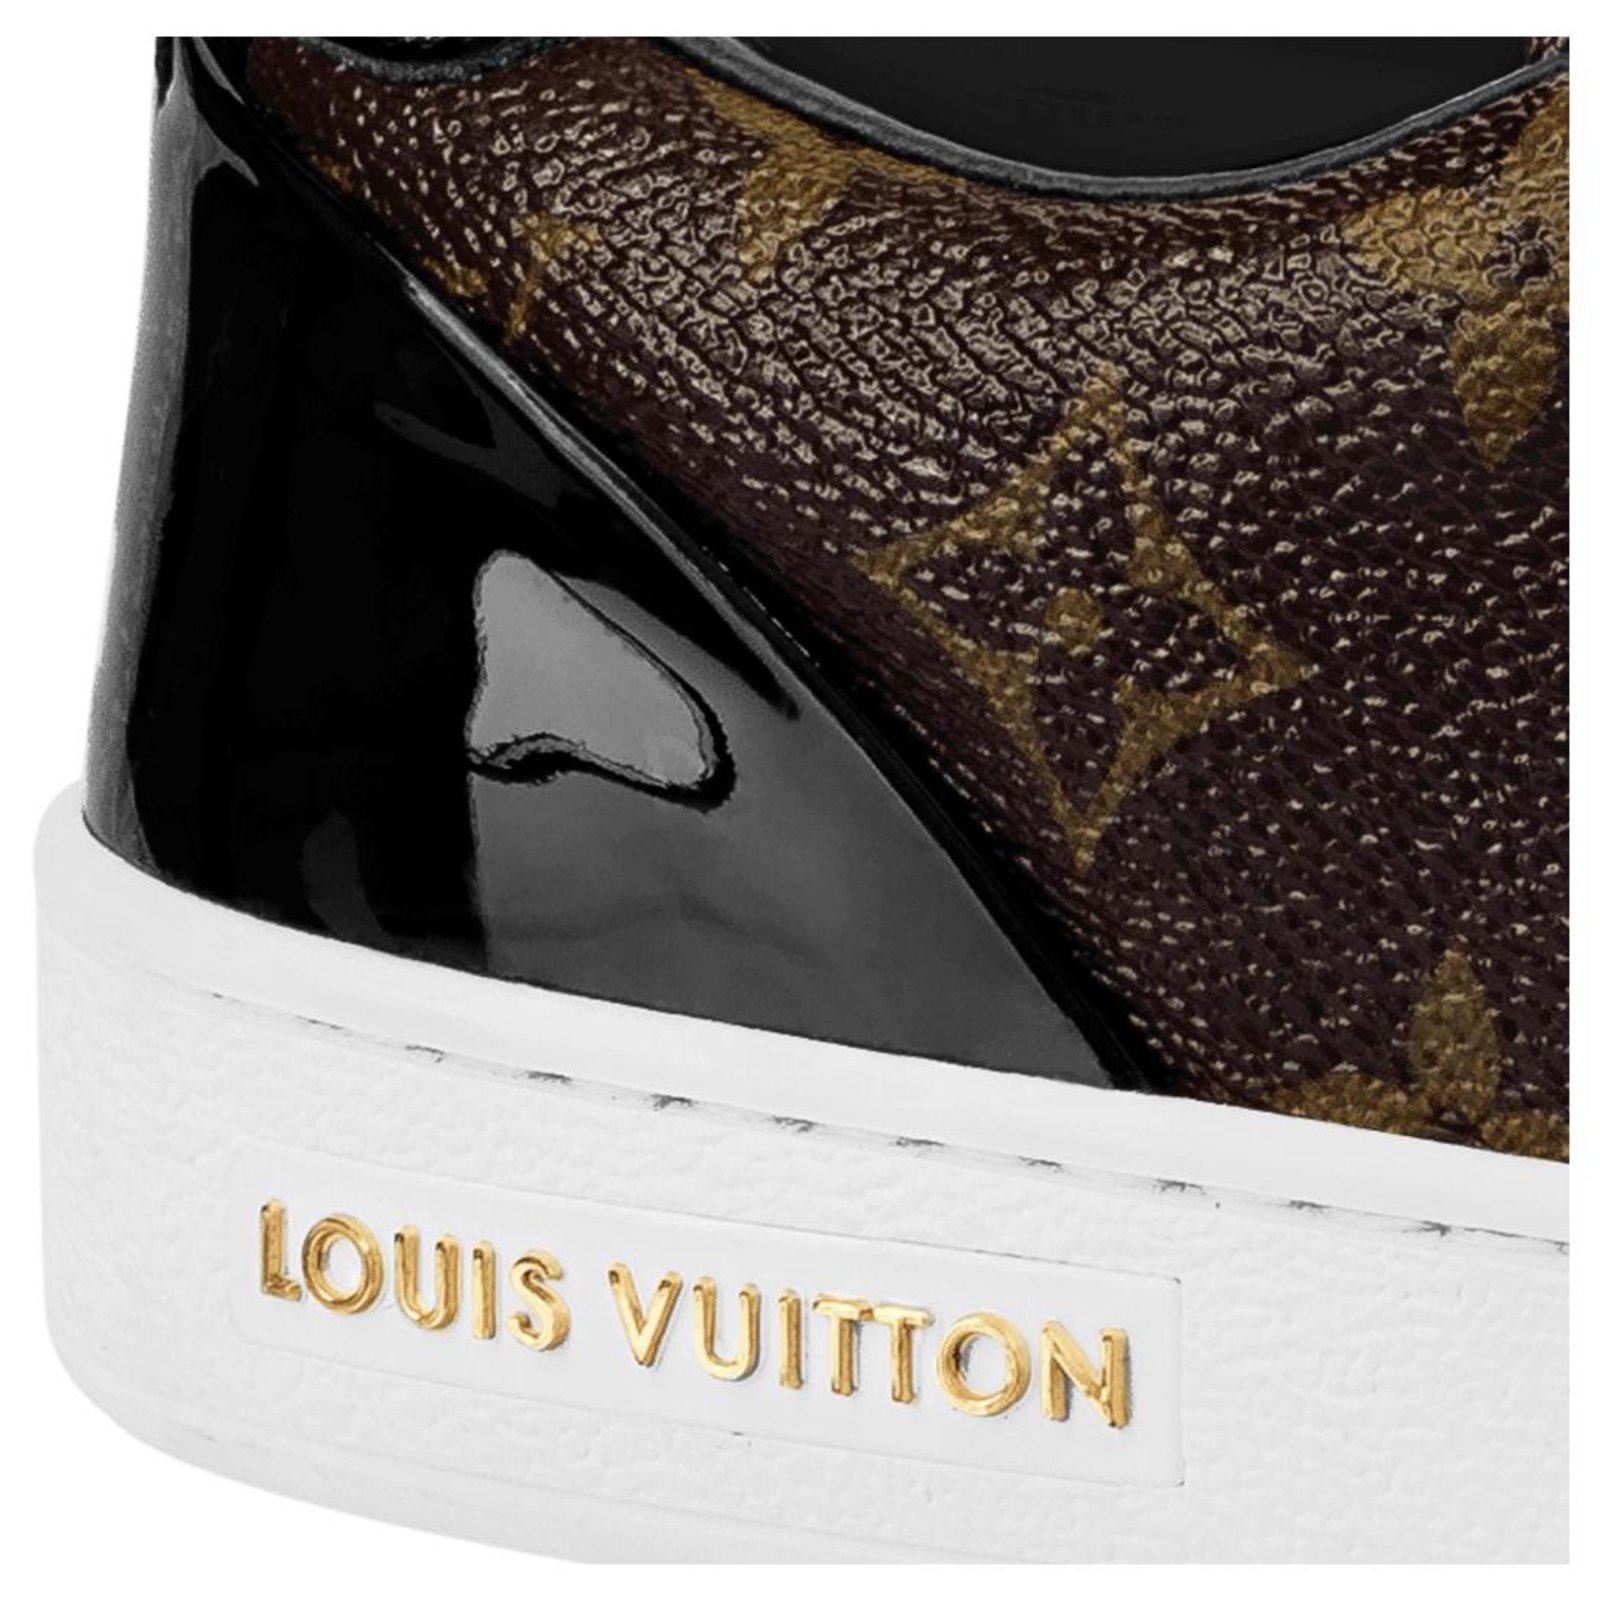 Frontrow leather trainers Louis Vuitton White size 37.5 EU in Leather -  19910063